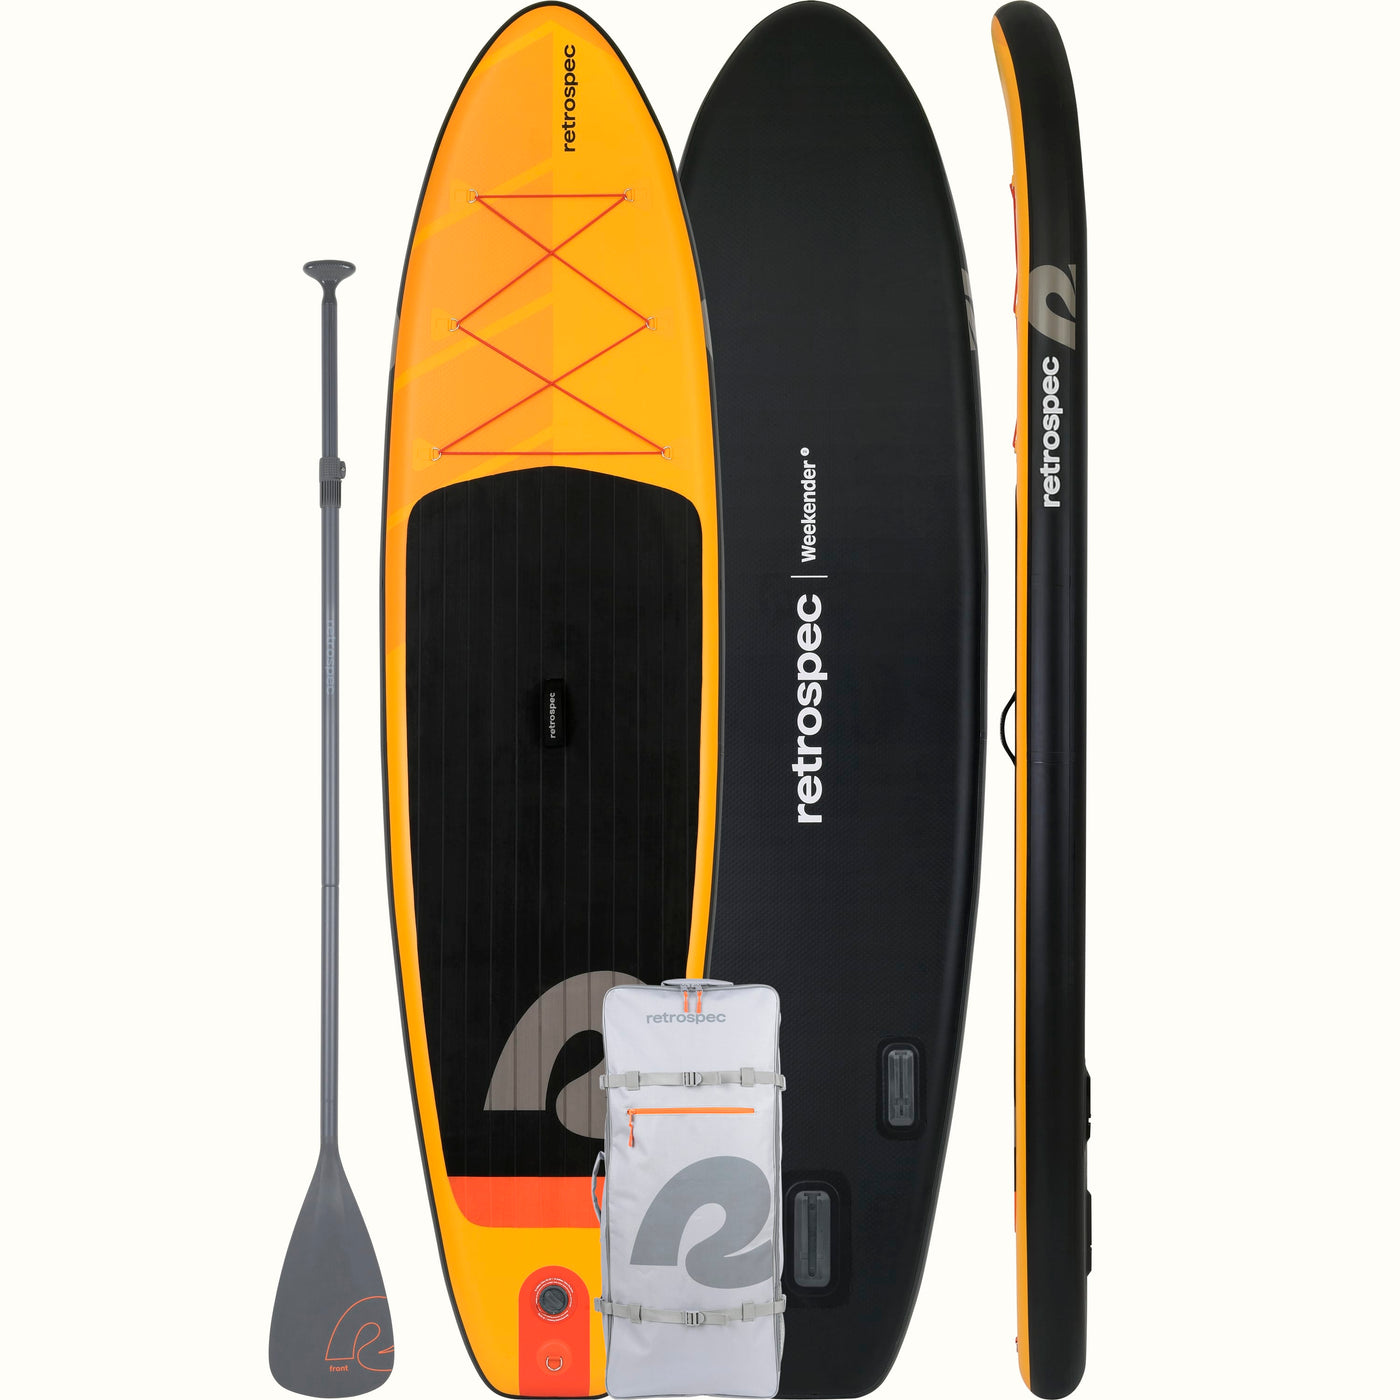 Weekender 2 Inflatable Stand Up Paddle Board 10’6” | Sunglow